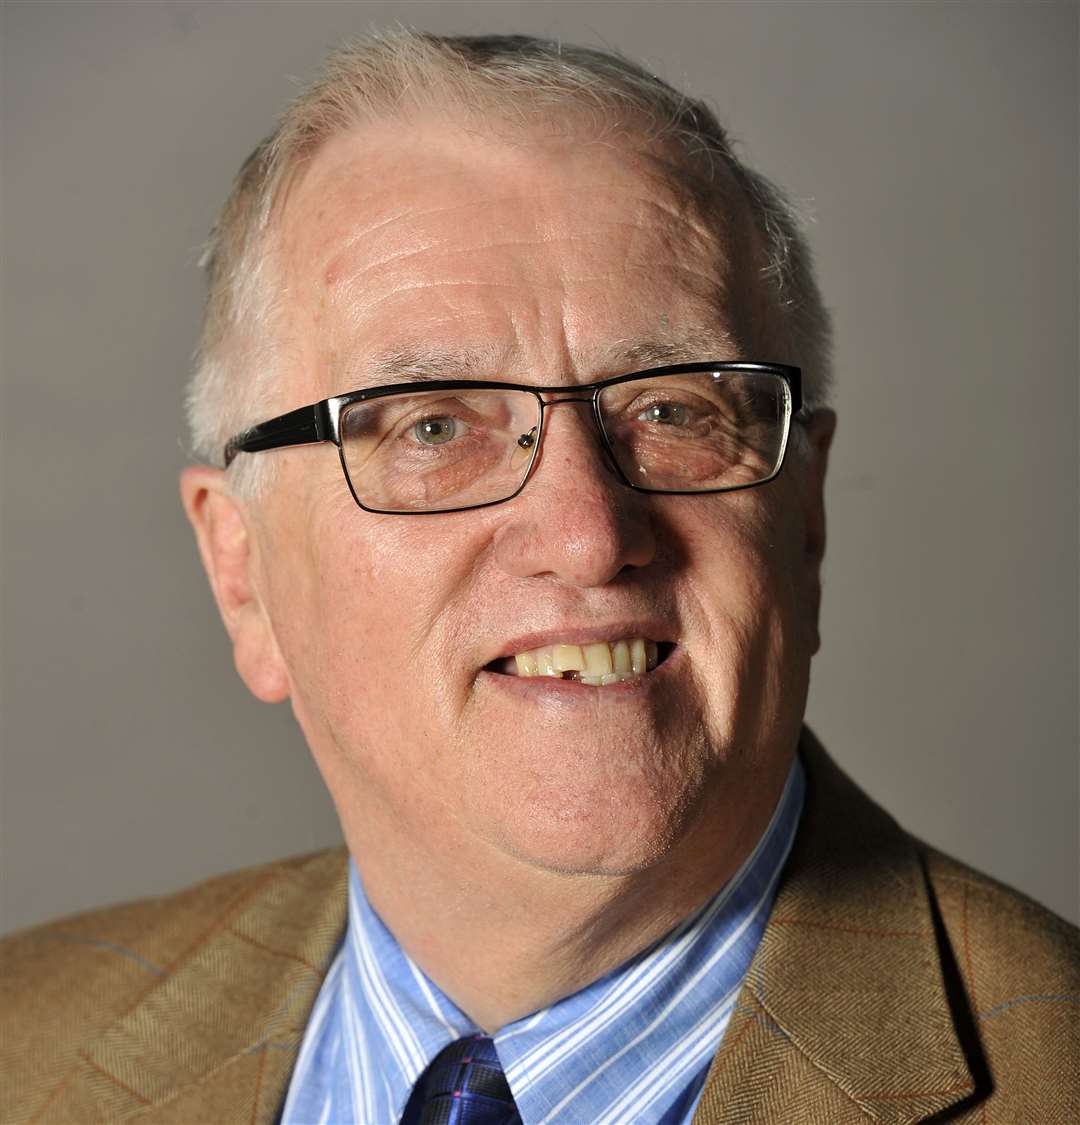 Cllr Howard Doe, Medway Council’s deputy leader and portfolio holder for housing and community services